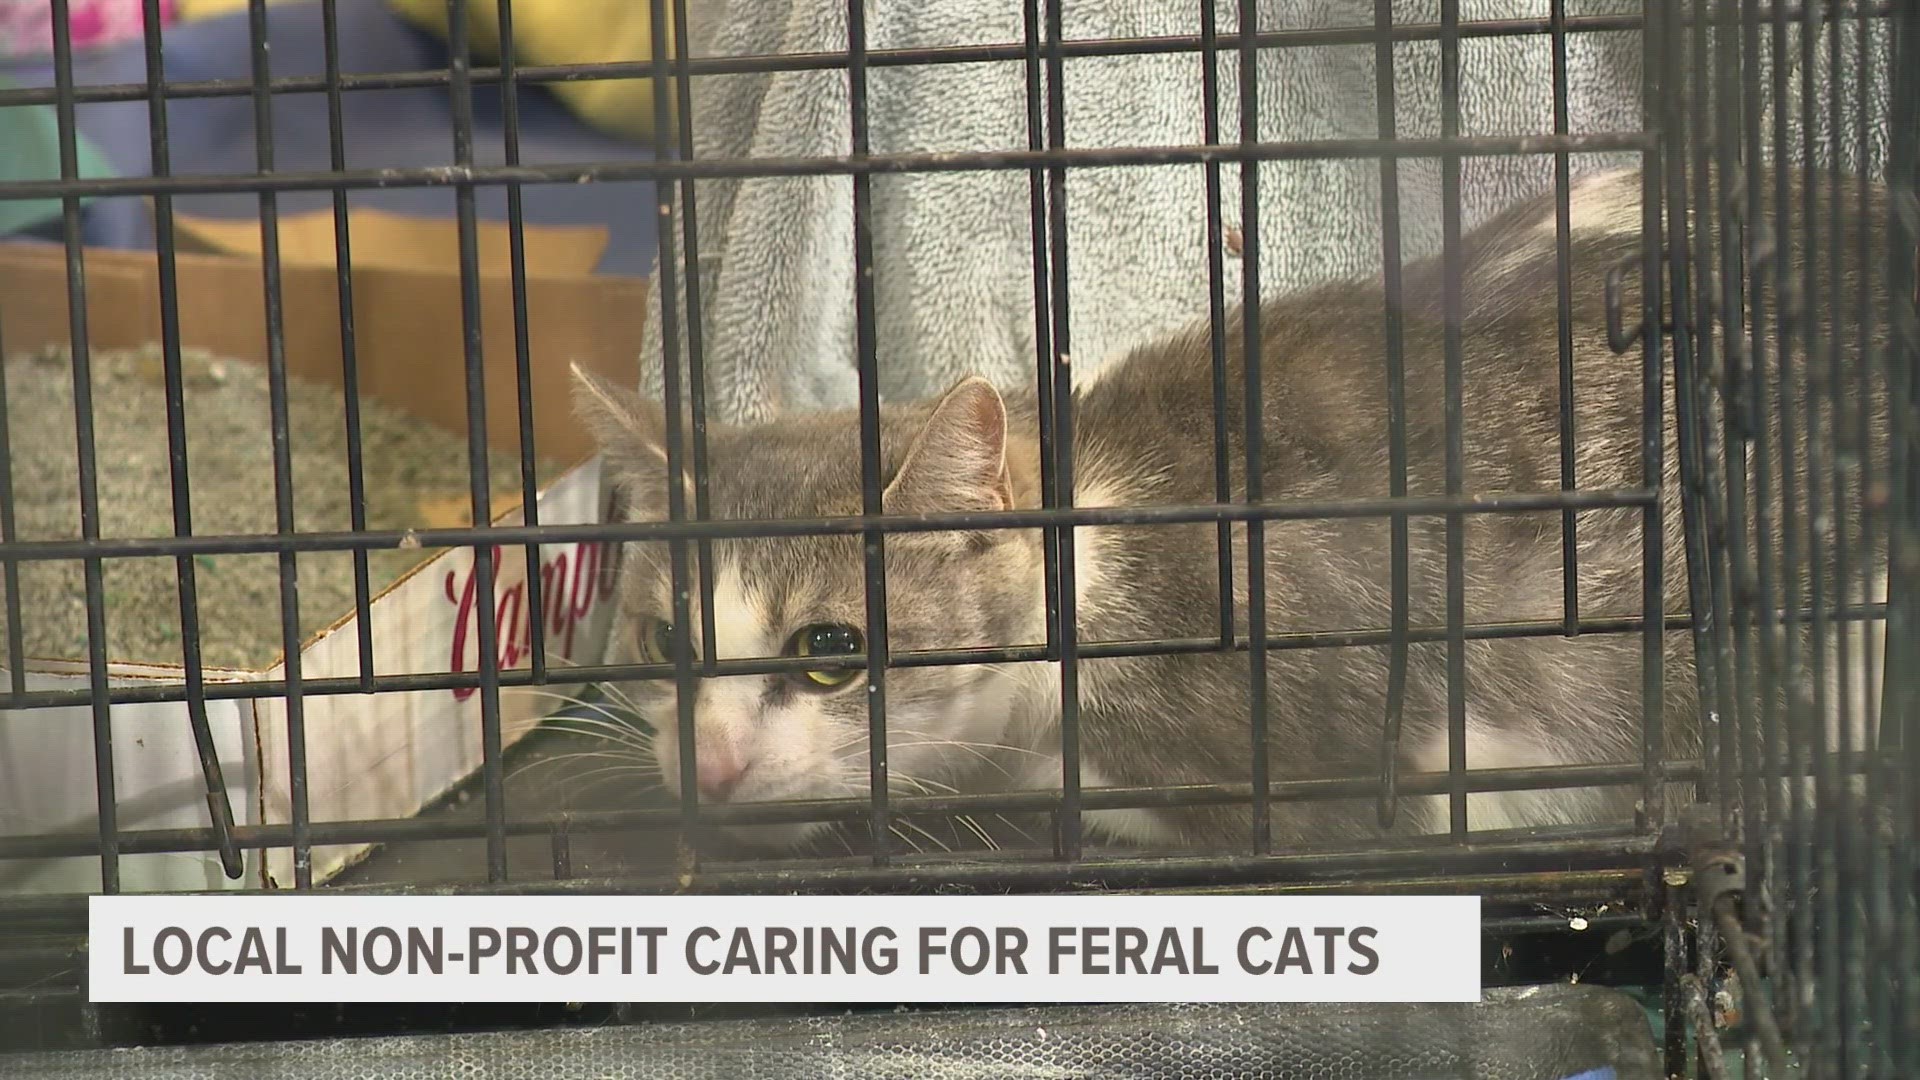 Feral Cat Solutions receives dozens of calls every day for cats found outside, as they say controlling the feral cat population is a community effort.